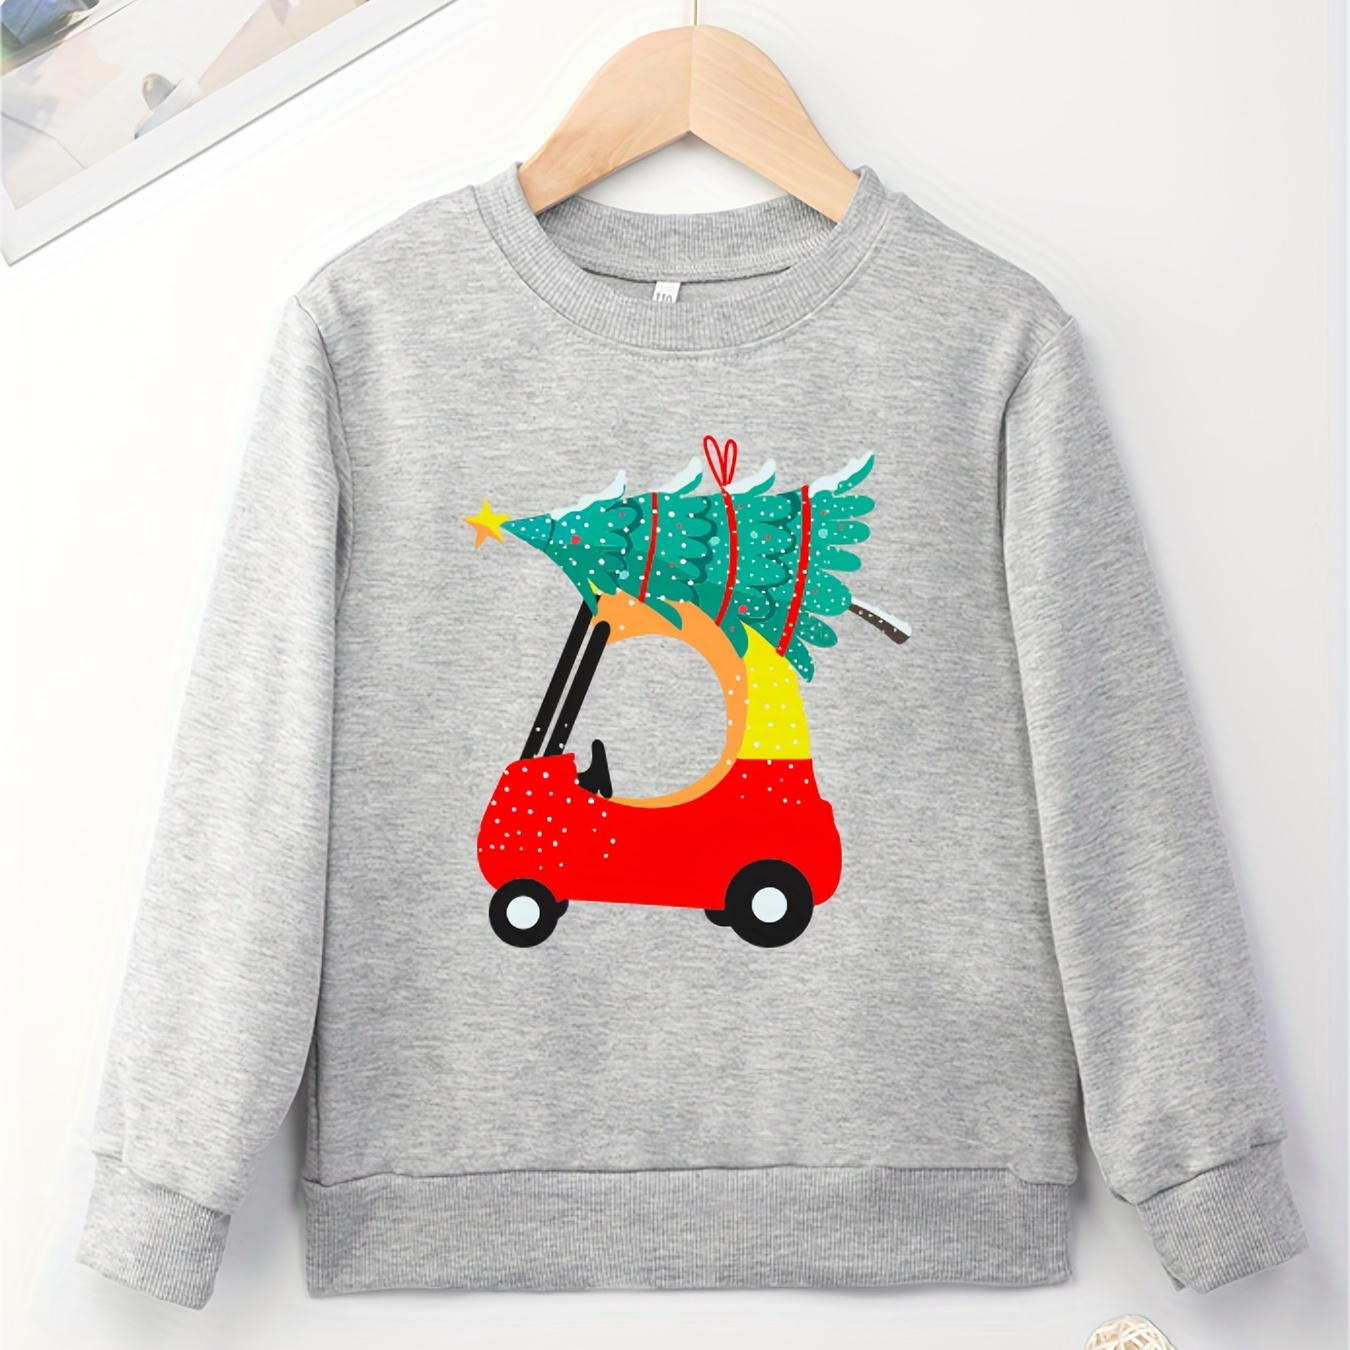 

Merry Christmas Tree And Car Print Sweatshirt For Boys - Casual Graphic Design With Stretch Fabric For Comfortable Autumn/winter Wear